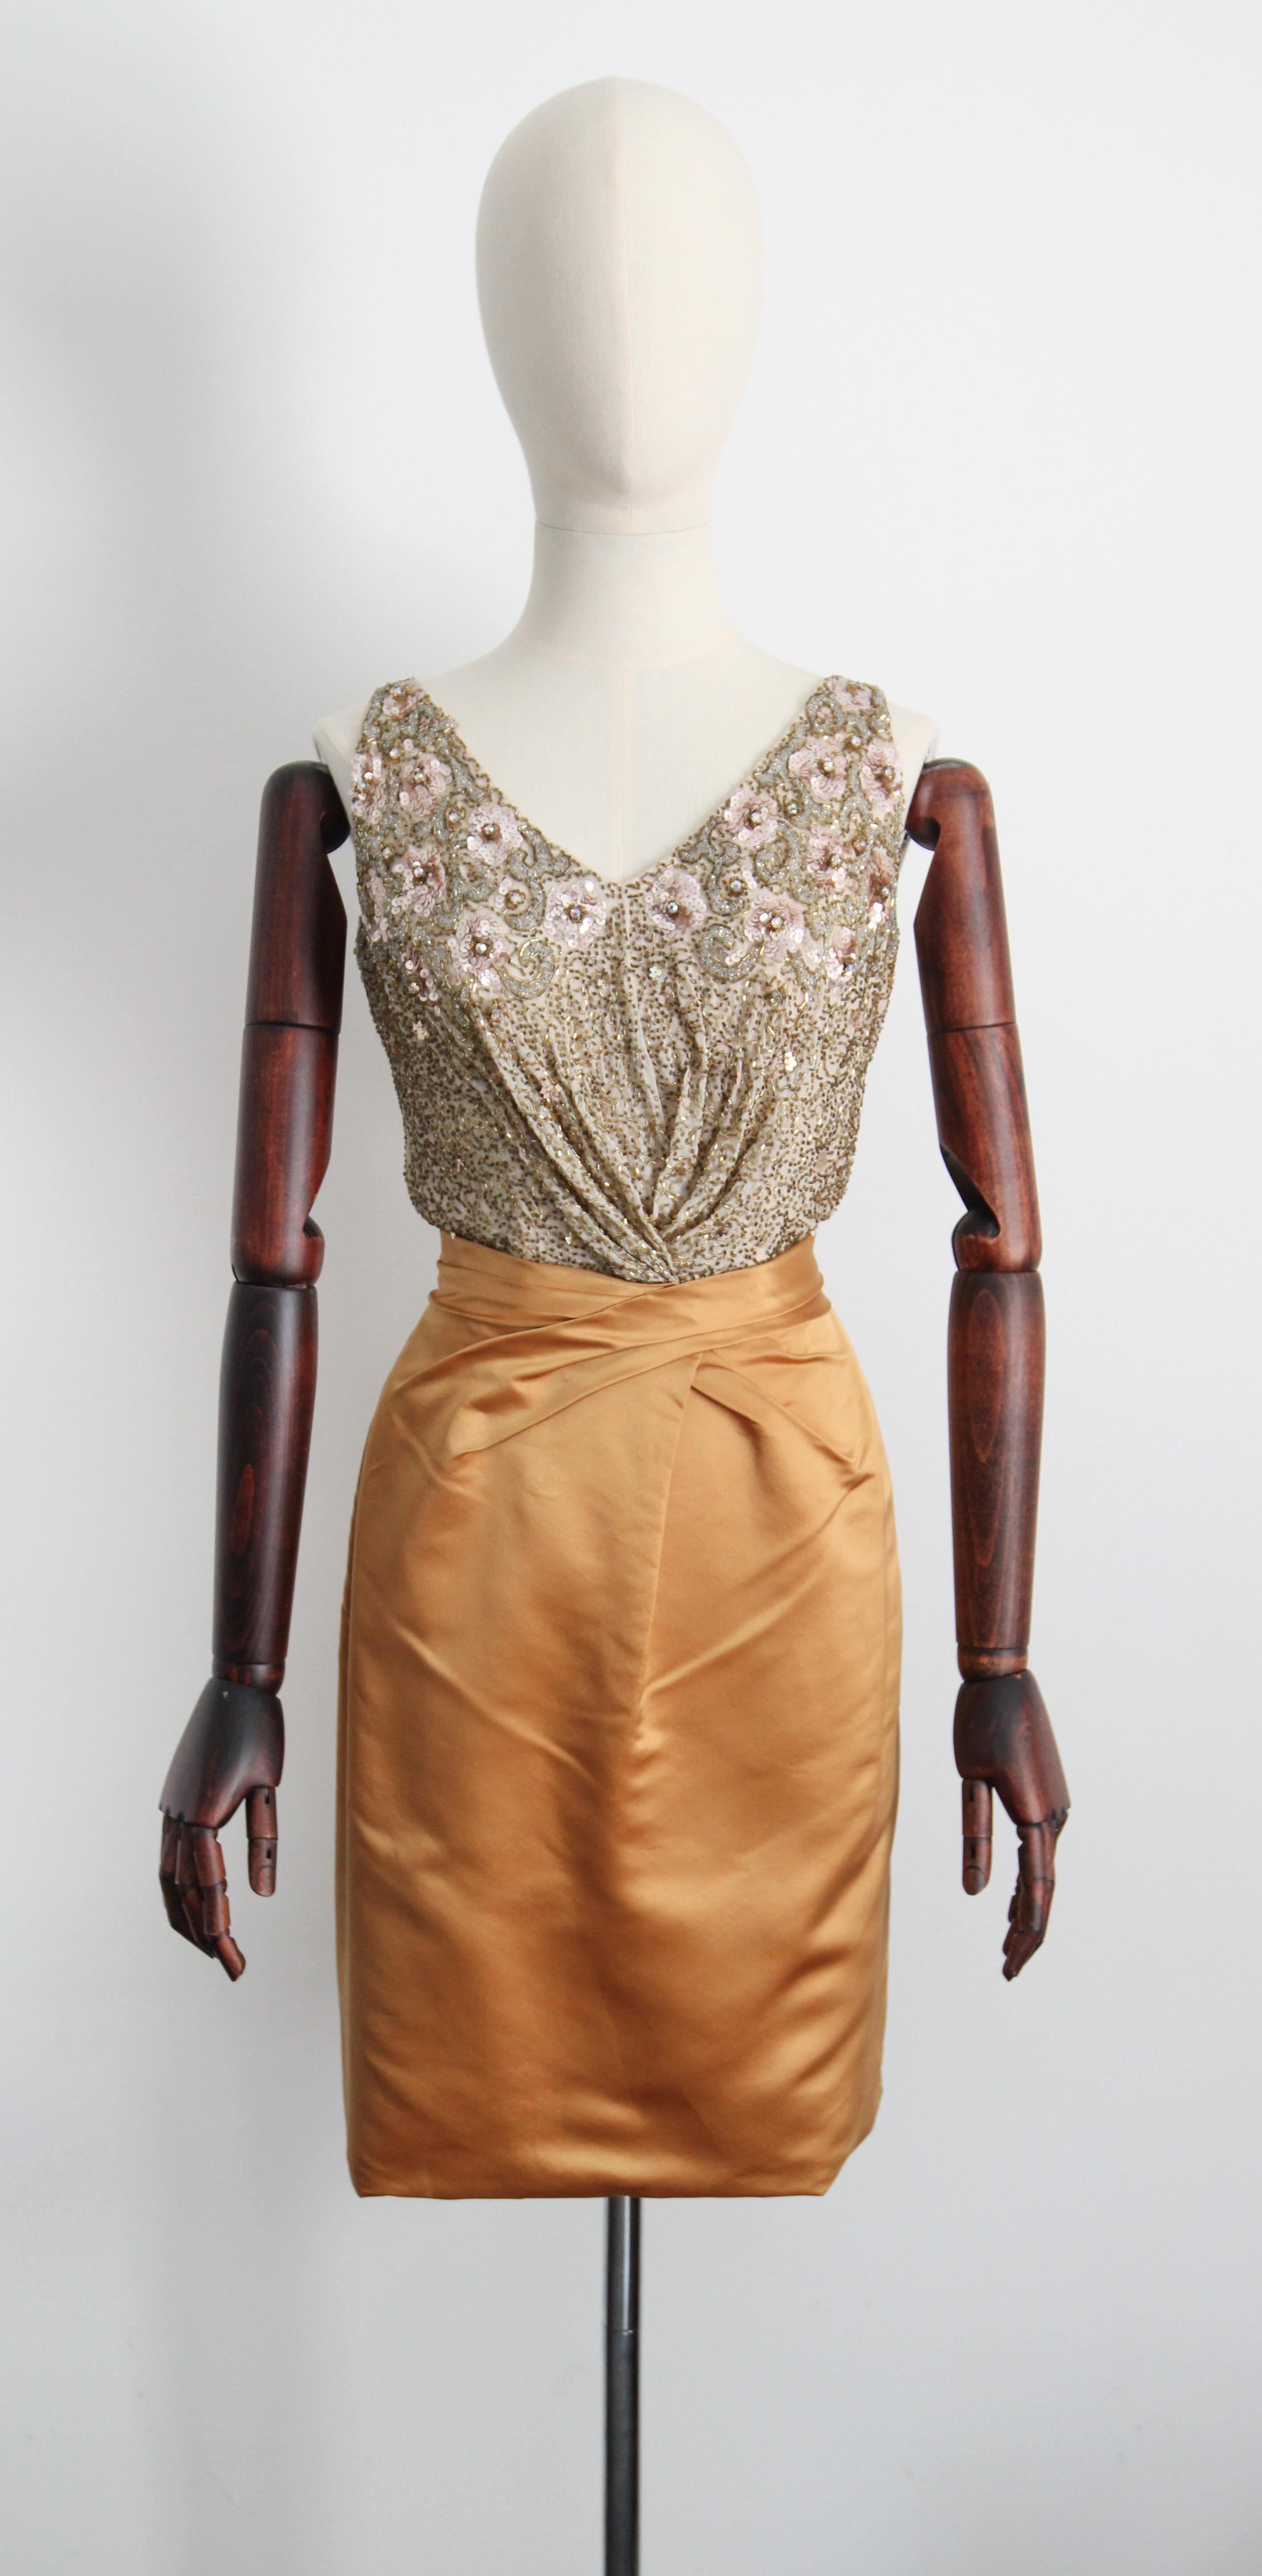 Rendered in a classic silhouette, this sumptuous 1950's Ceil Chapman dress, in a bold gold satin, contrasted by a cream silk bodice embellished with trailing gold glass bugle beads, contouring silk and pink sequin flowers, finished with iridescent